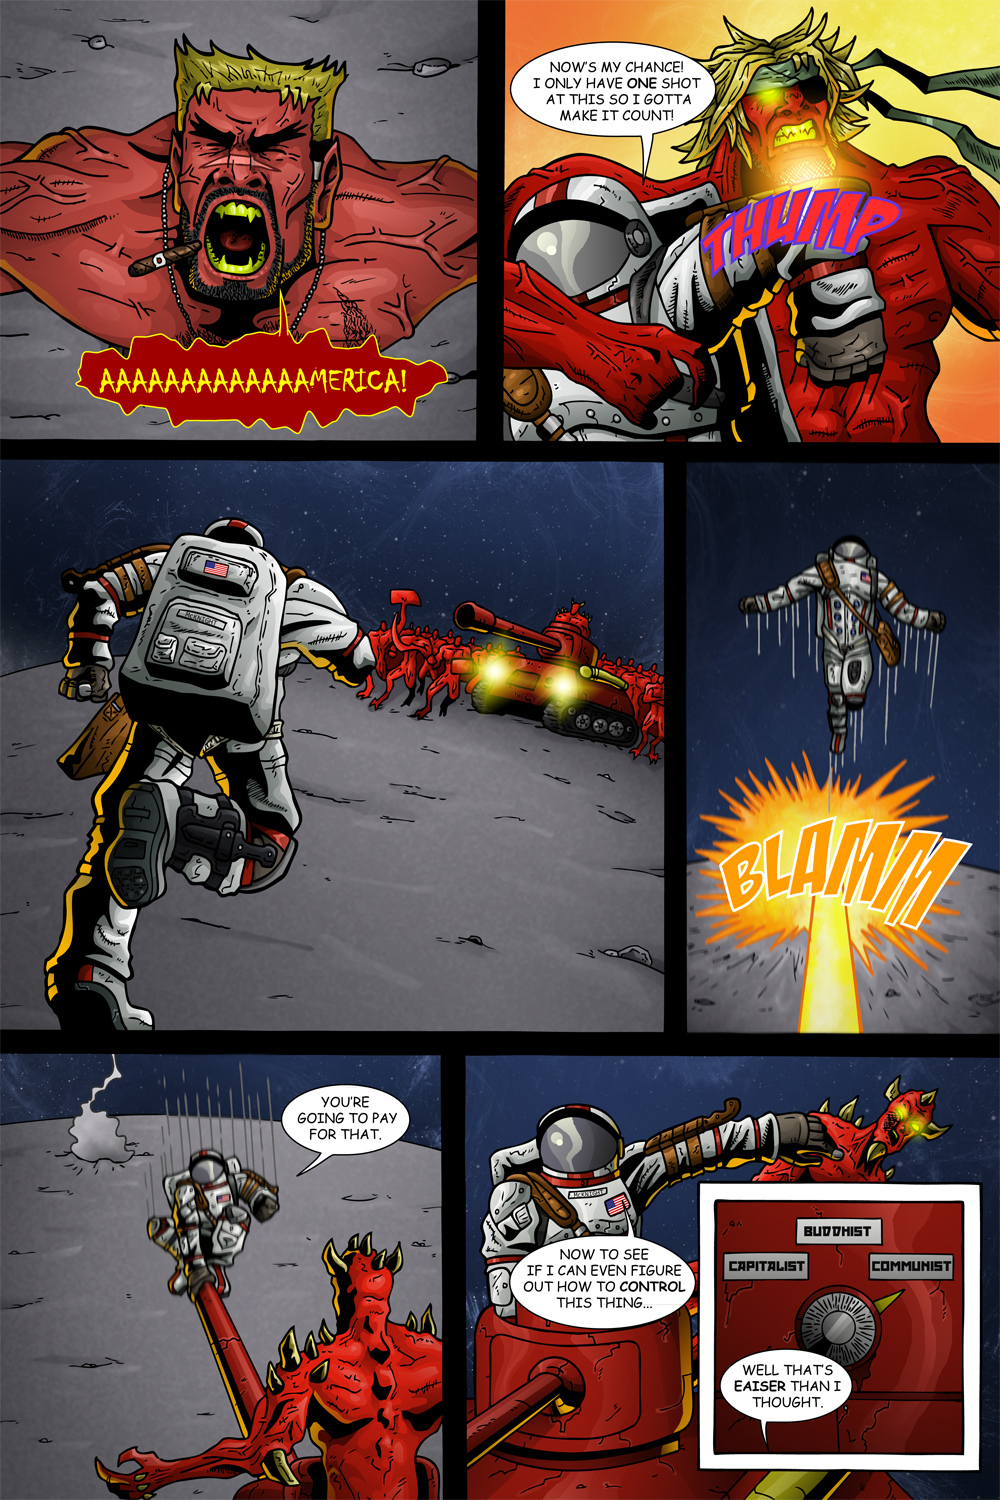 MISSION 007: PAGE 02 “PAY FOR THAT”